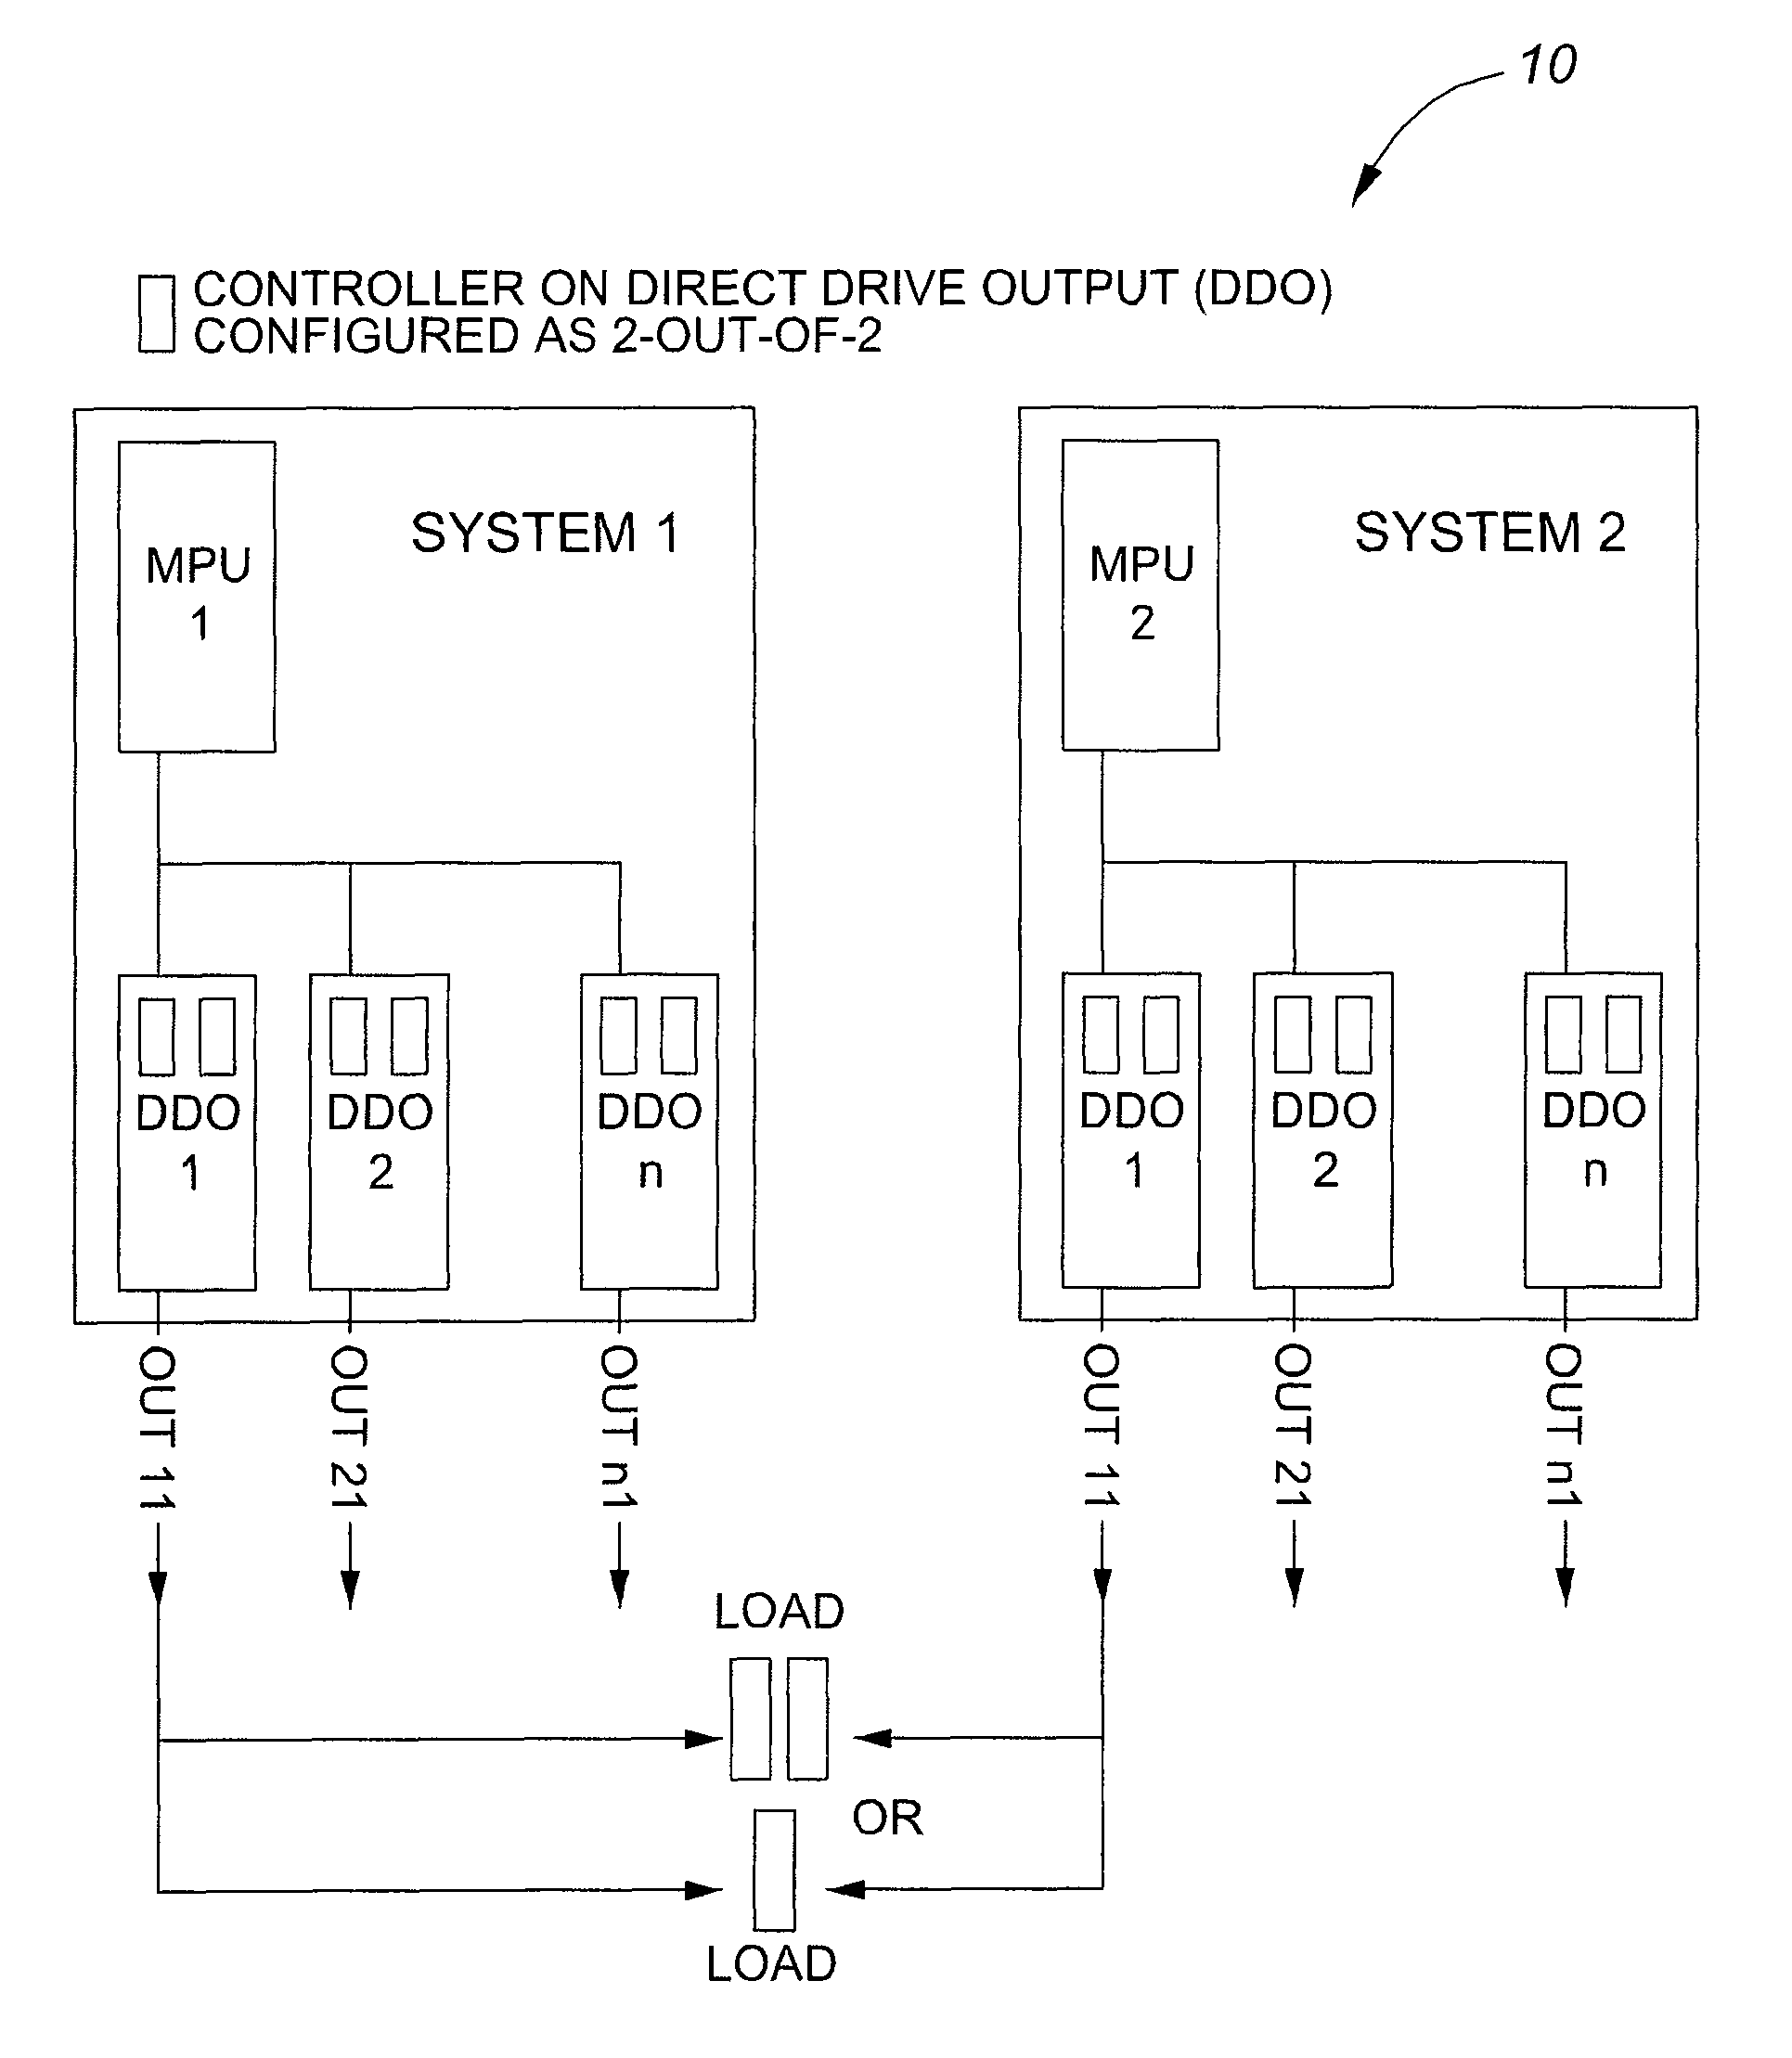 Railway signaling system with redundant controllers